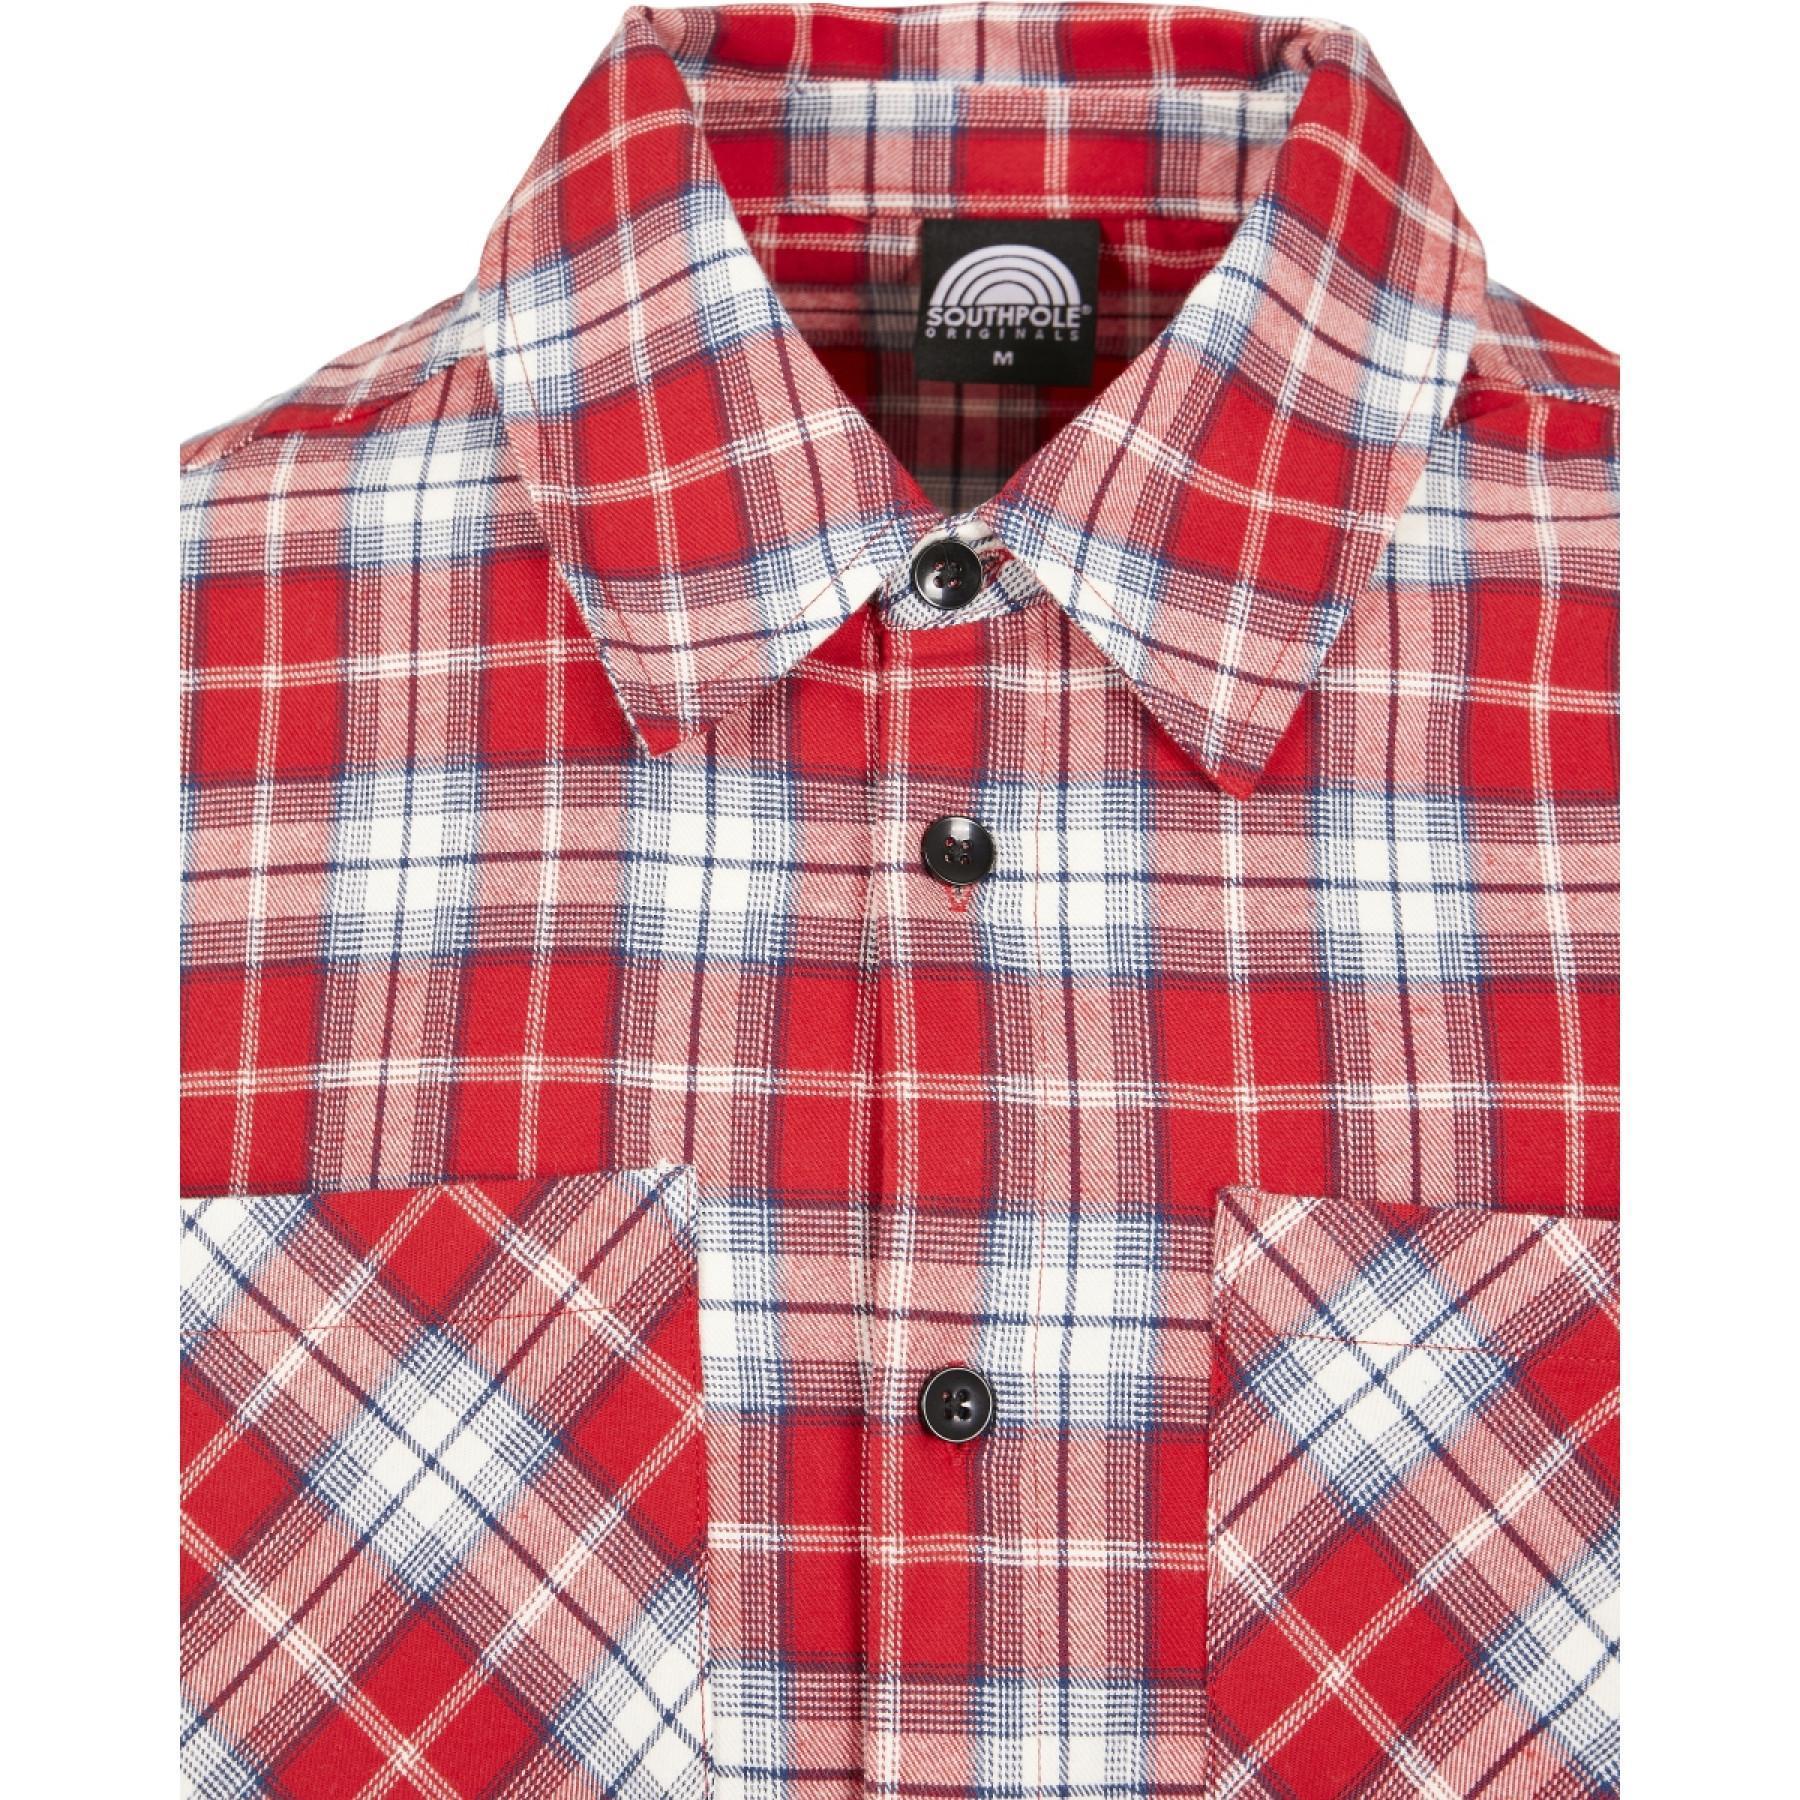 Chemise Southpole checked